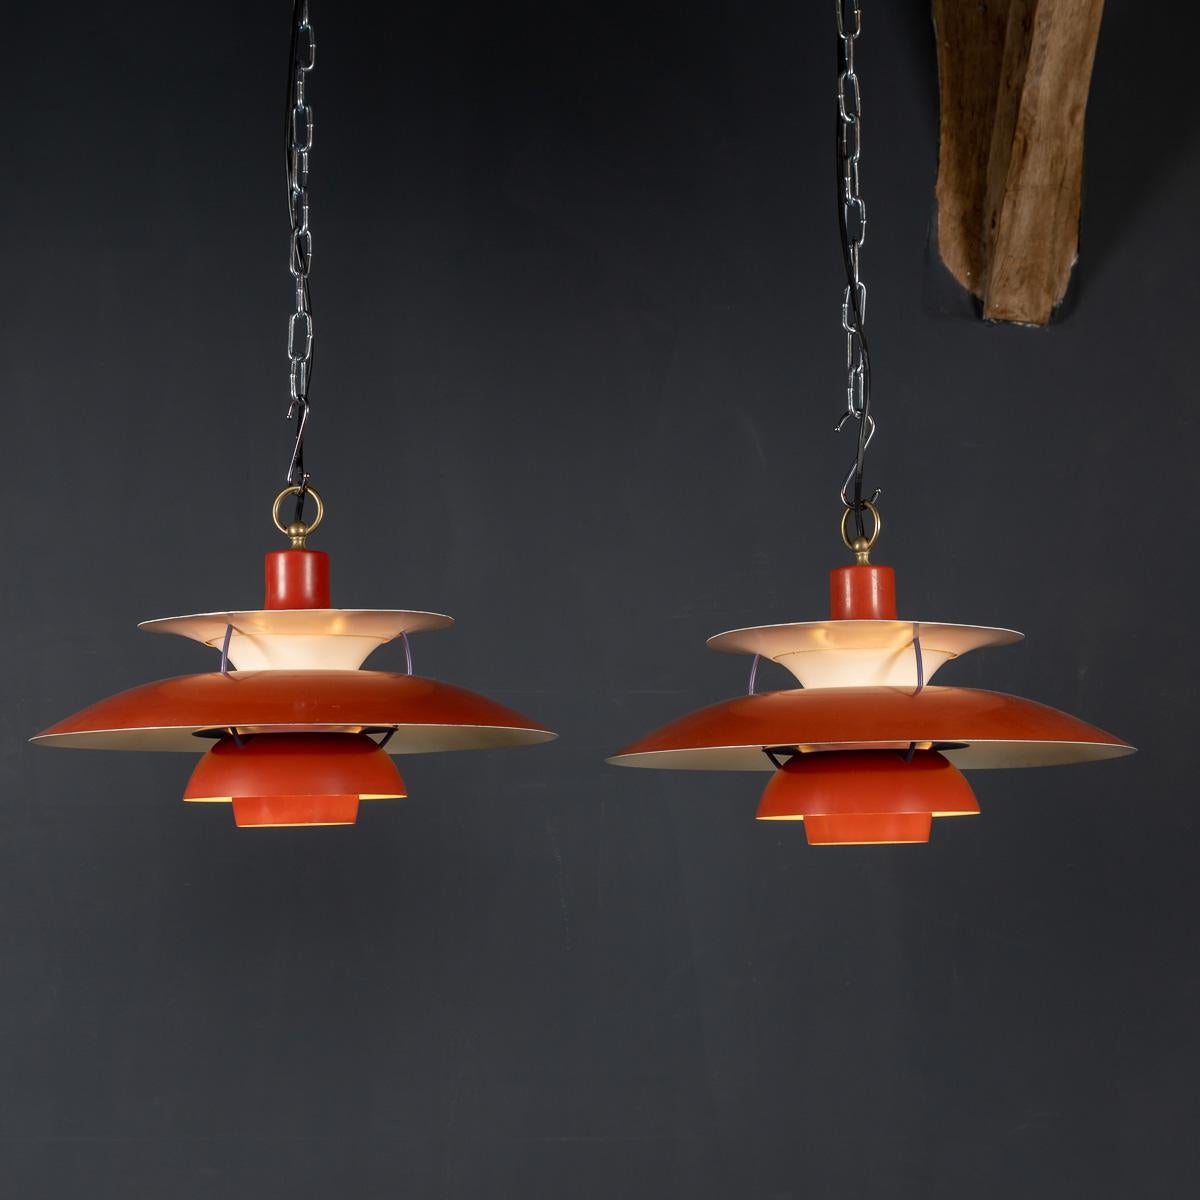 A pair of mid 20th century Louis Poulsen PH5 metal shade light manufactured by Danish company Paul Henningsen between 1960 - 1970 with original orange colour paint.

Condition
In great condition - wear consistent with age.

Size
Diameter: